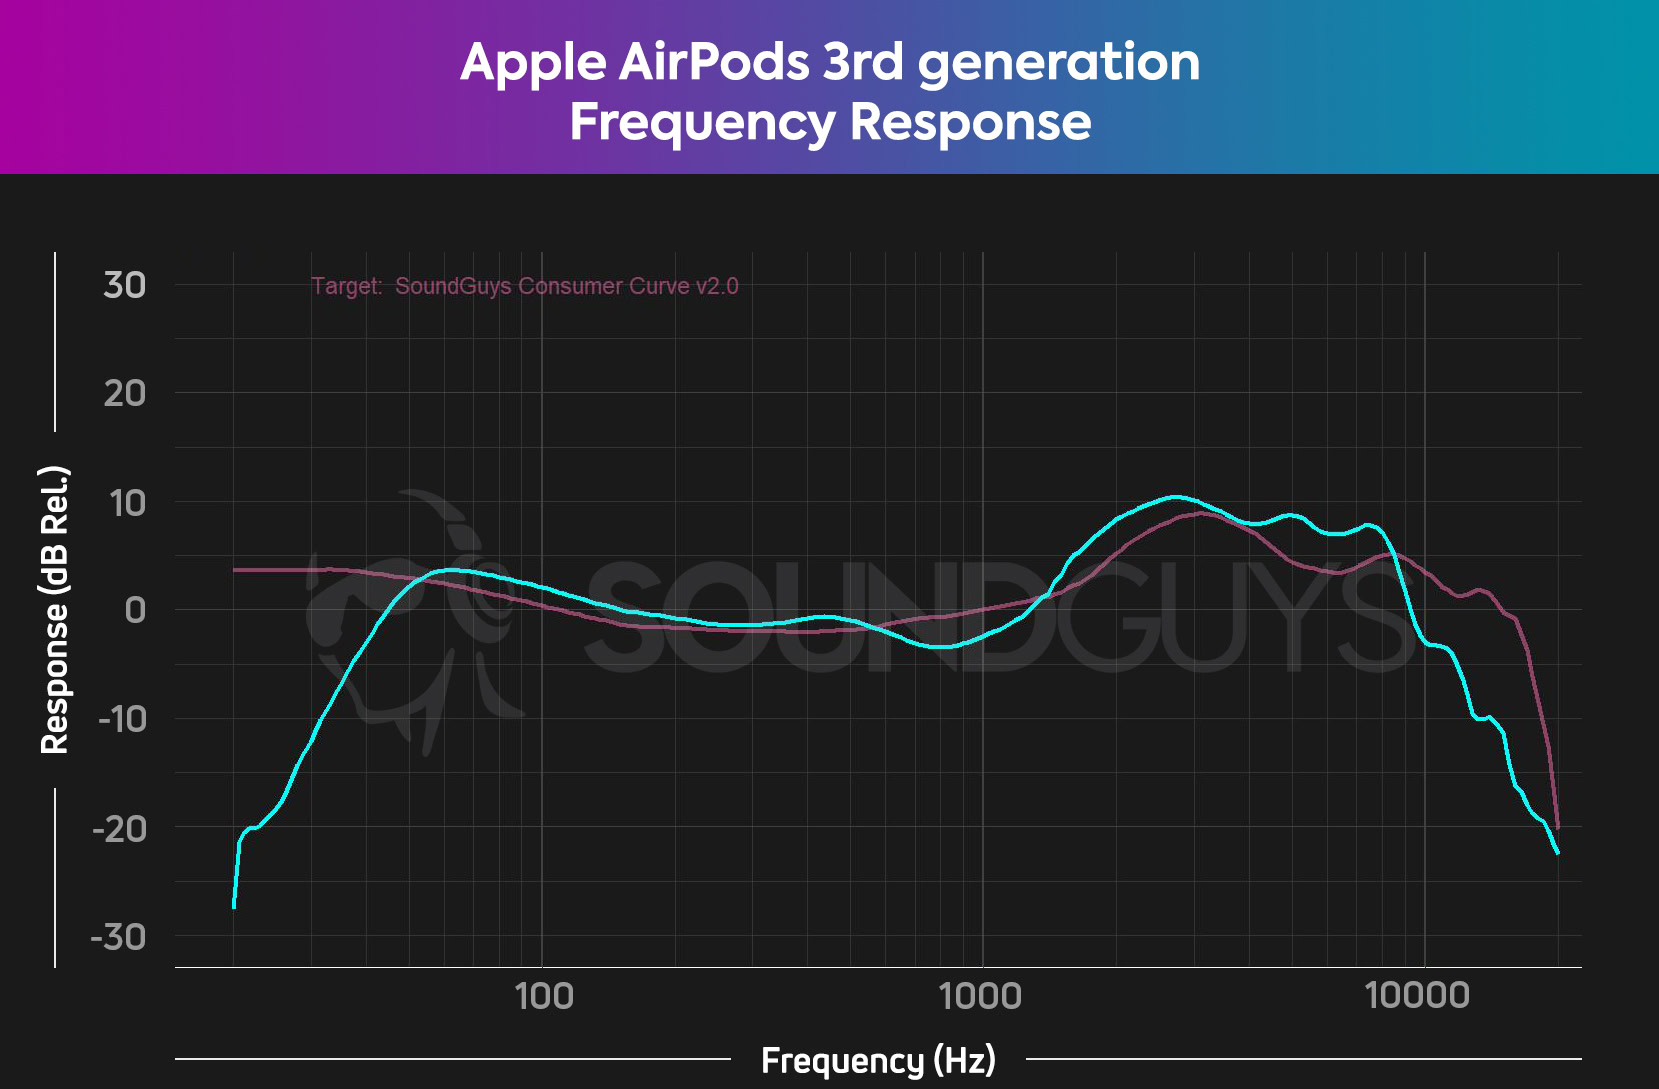 Apple AirPods 3rd generation frequency response chart.